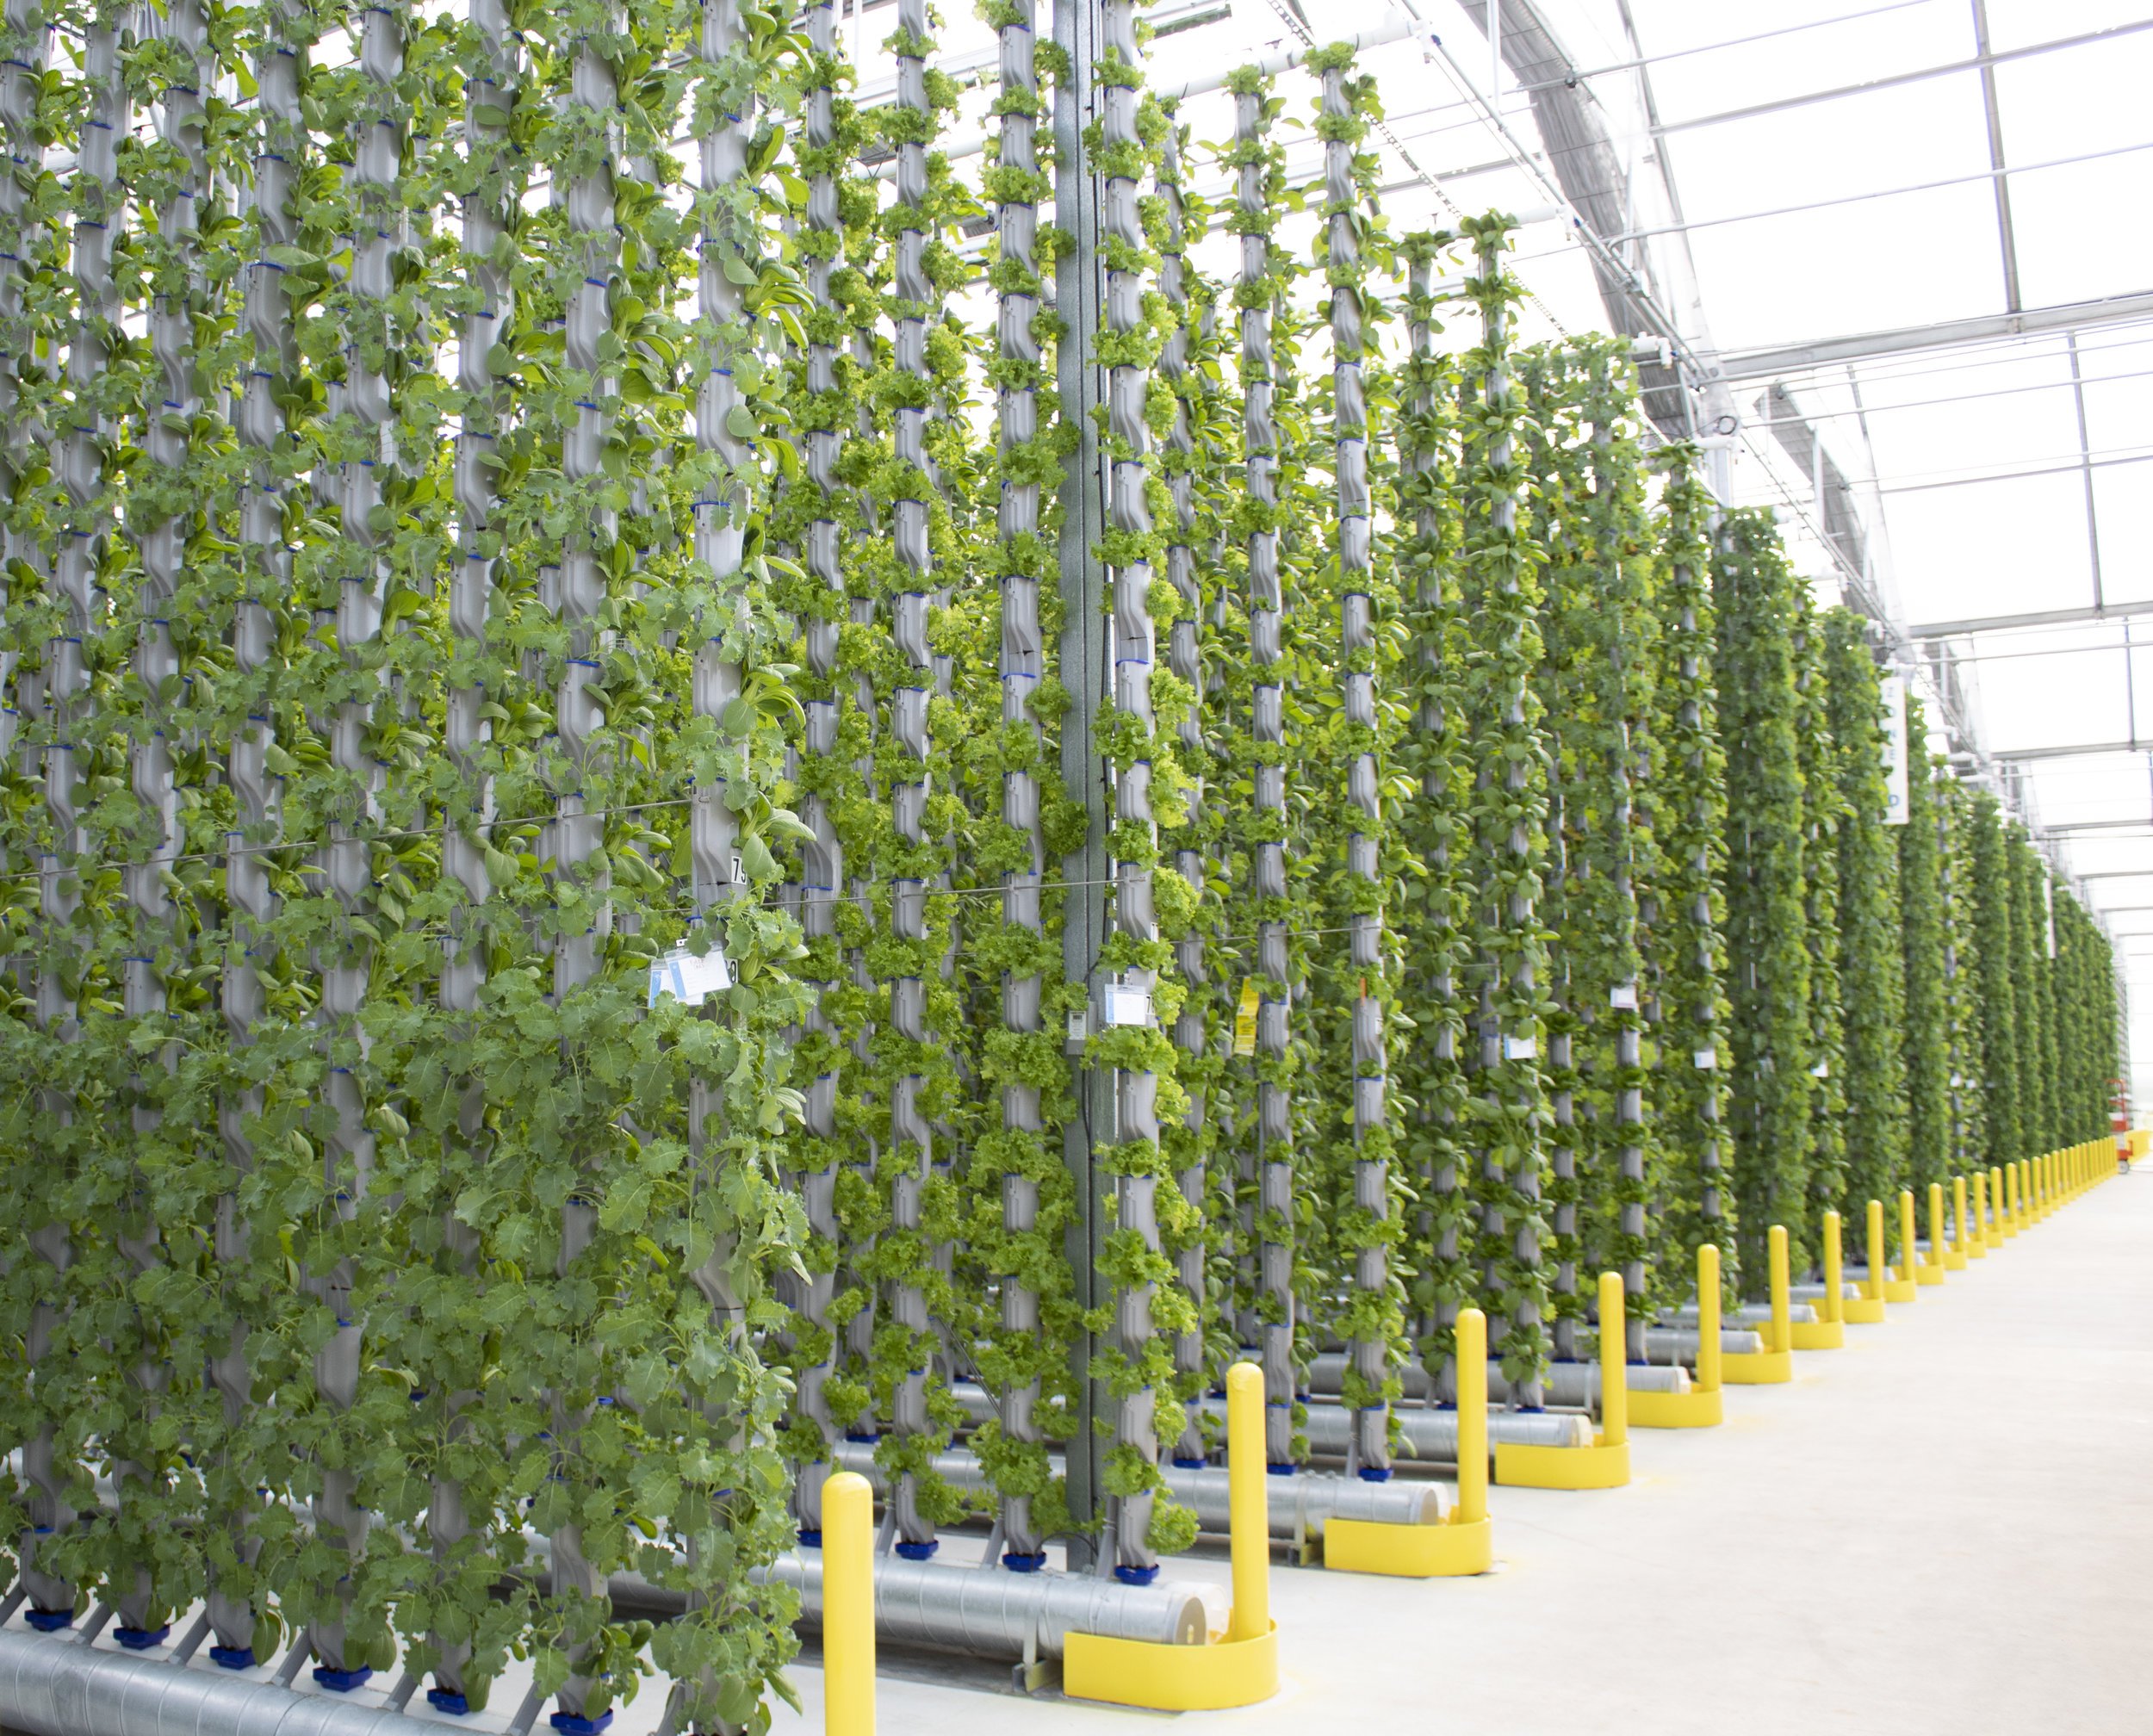 Rows and rows of vertical hydroponic walls